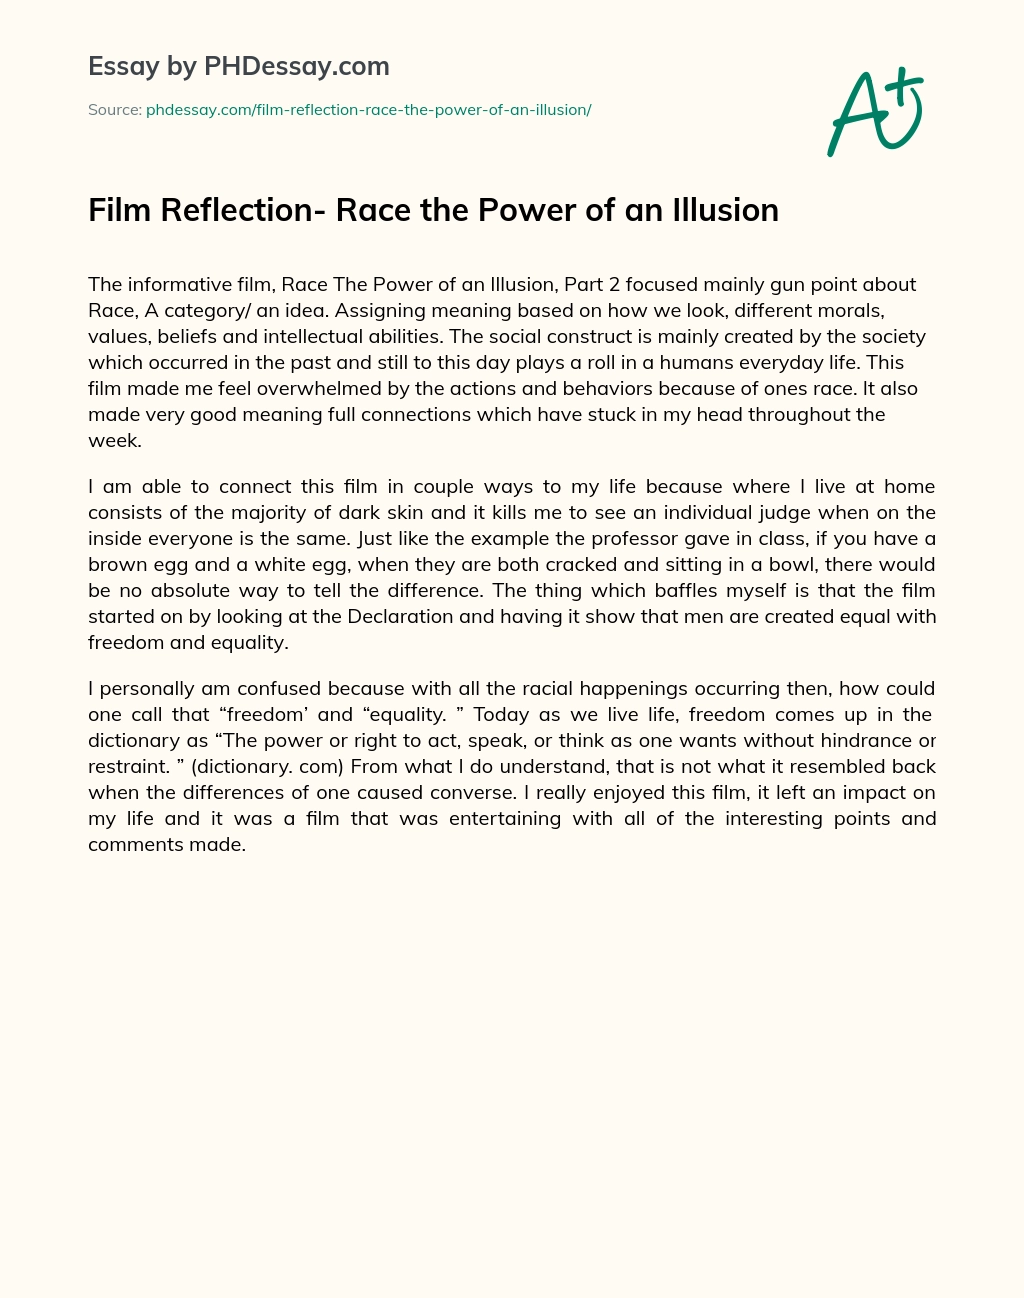 Film Reflection- Race the Power of an Illusion essay